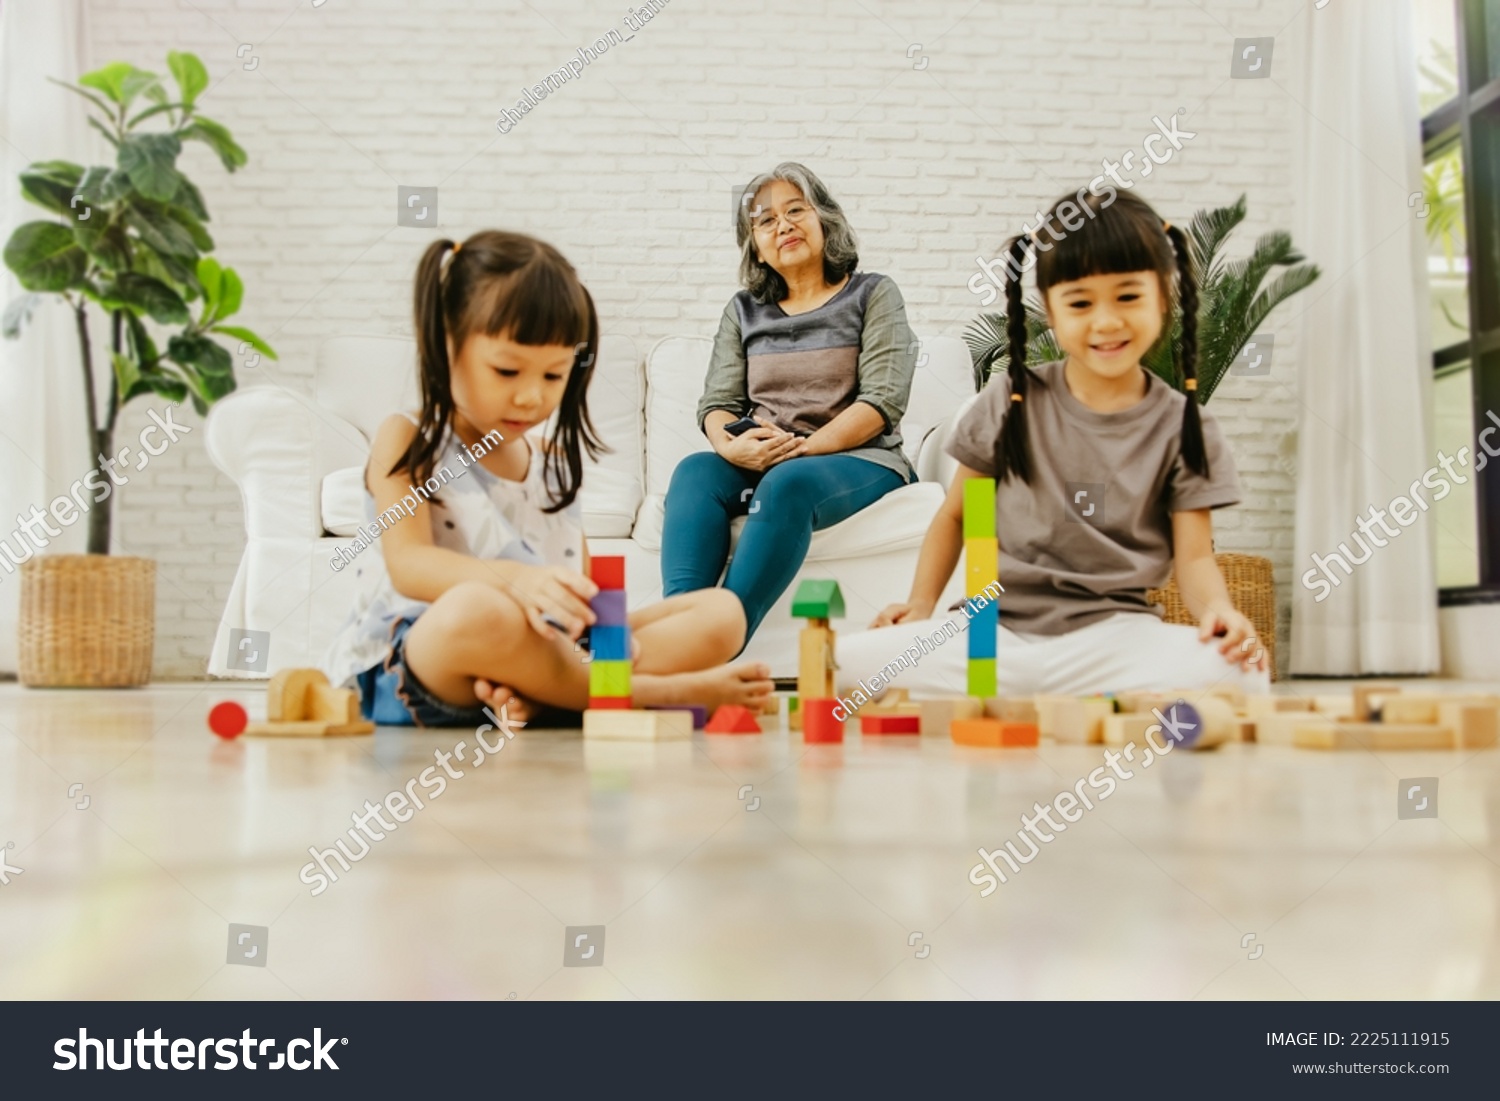 Grandma sits on the sofa and watches two girls and granddaughters play with colorful wooden blocks that are non toxic to form tall tower with adorable ingenuity : Selected focus  #2225111915